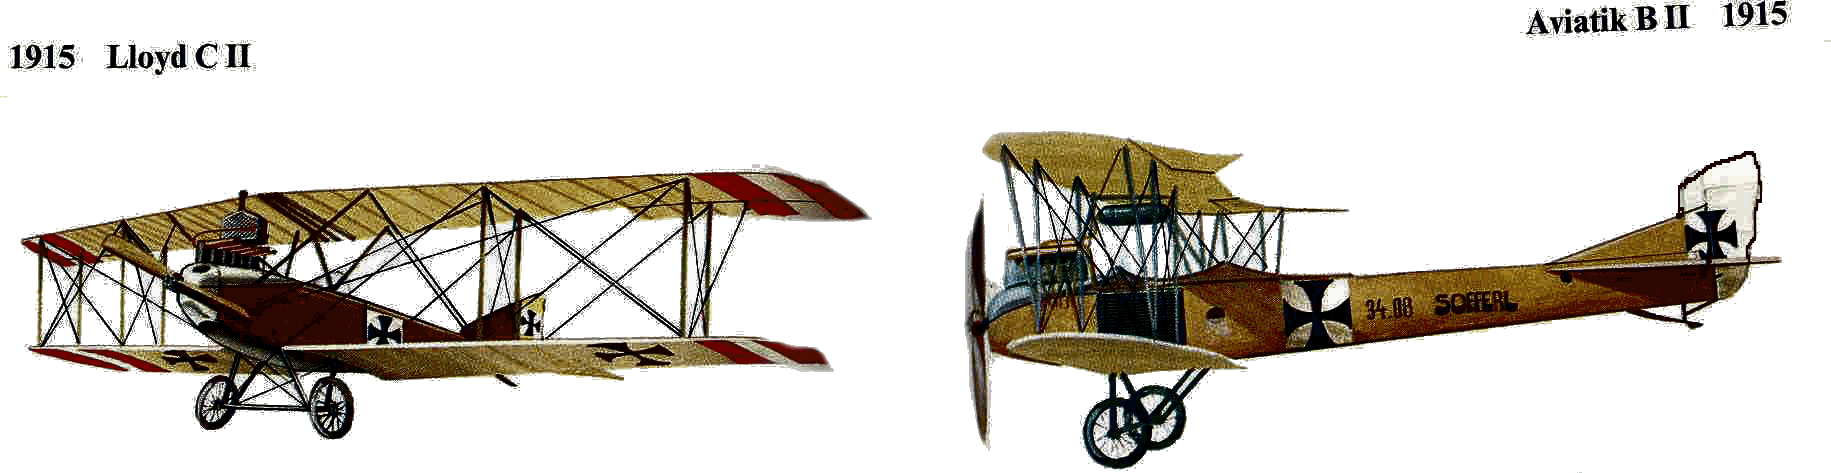 two austrian fighters of 1915